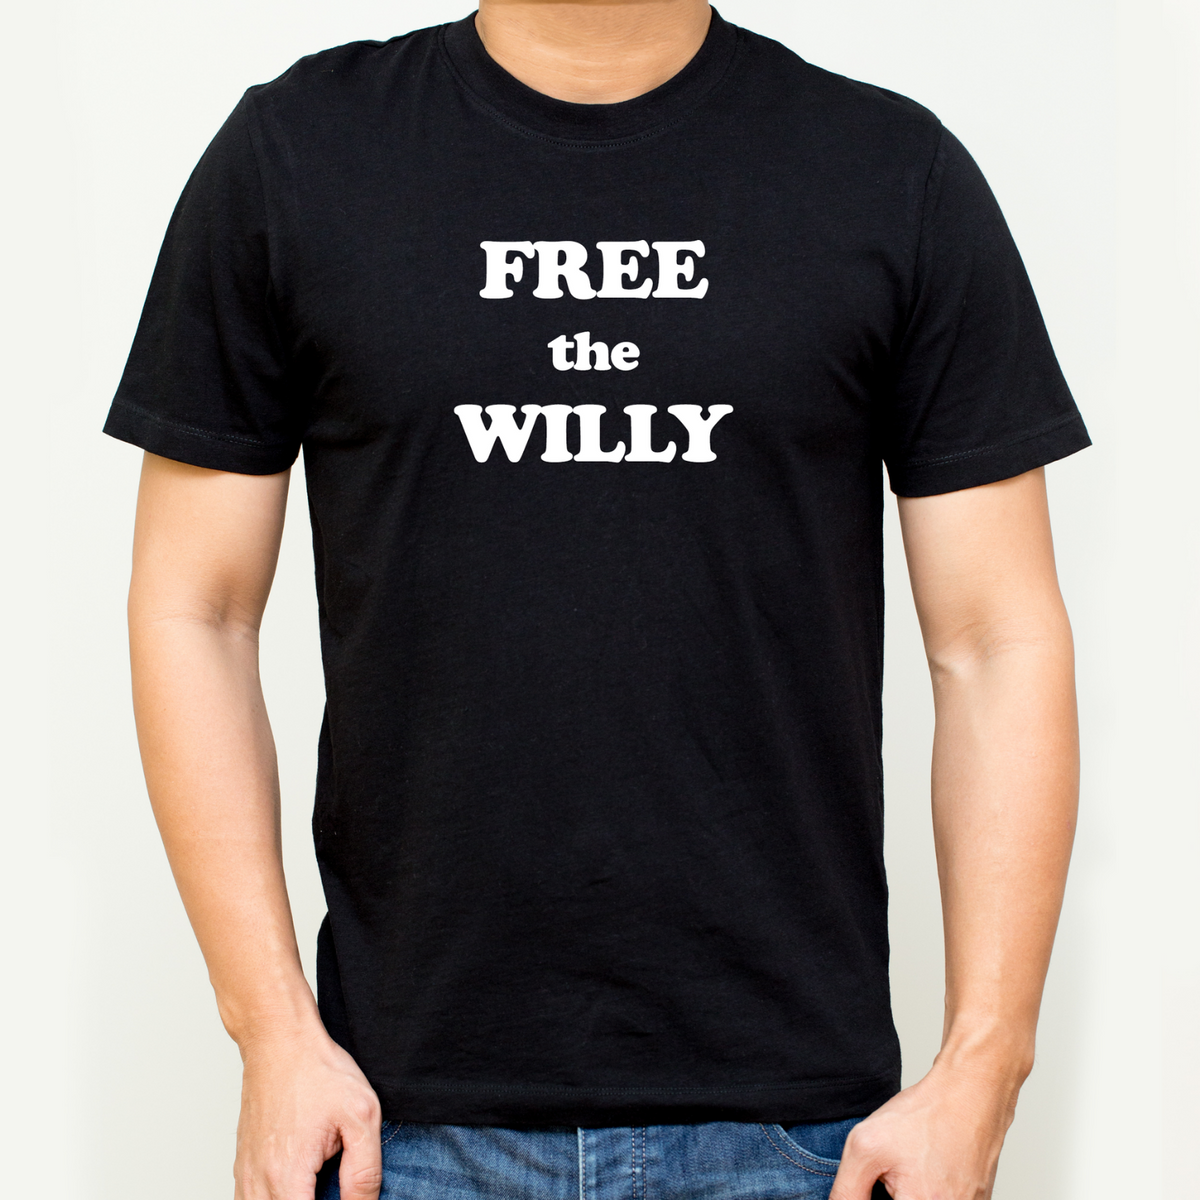 FREE the WILLY